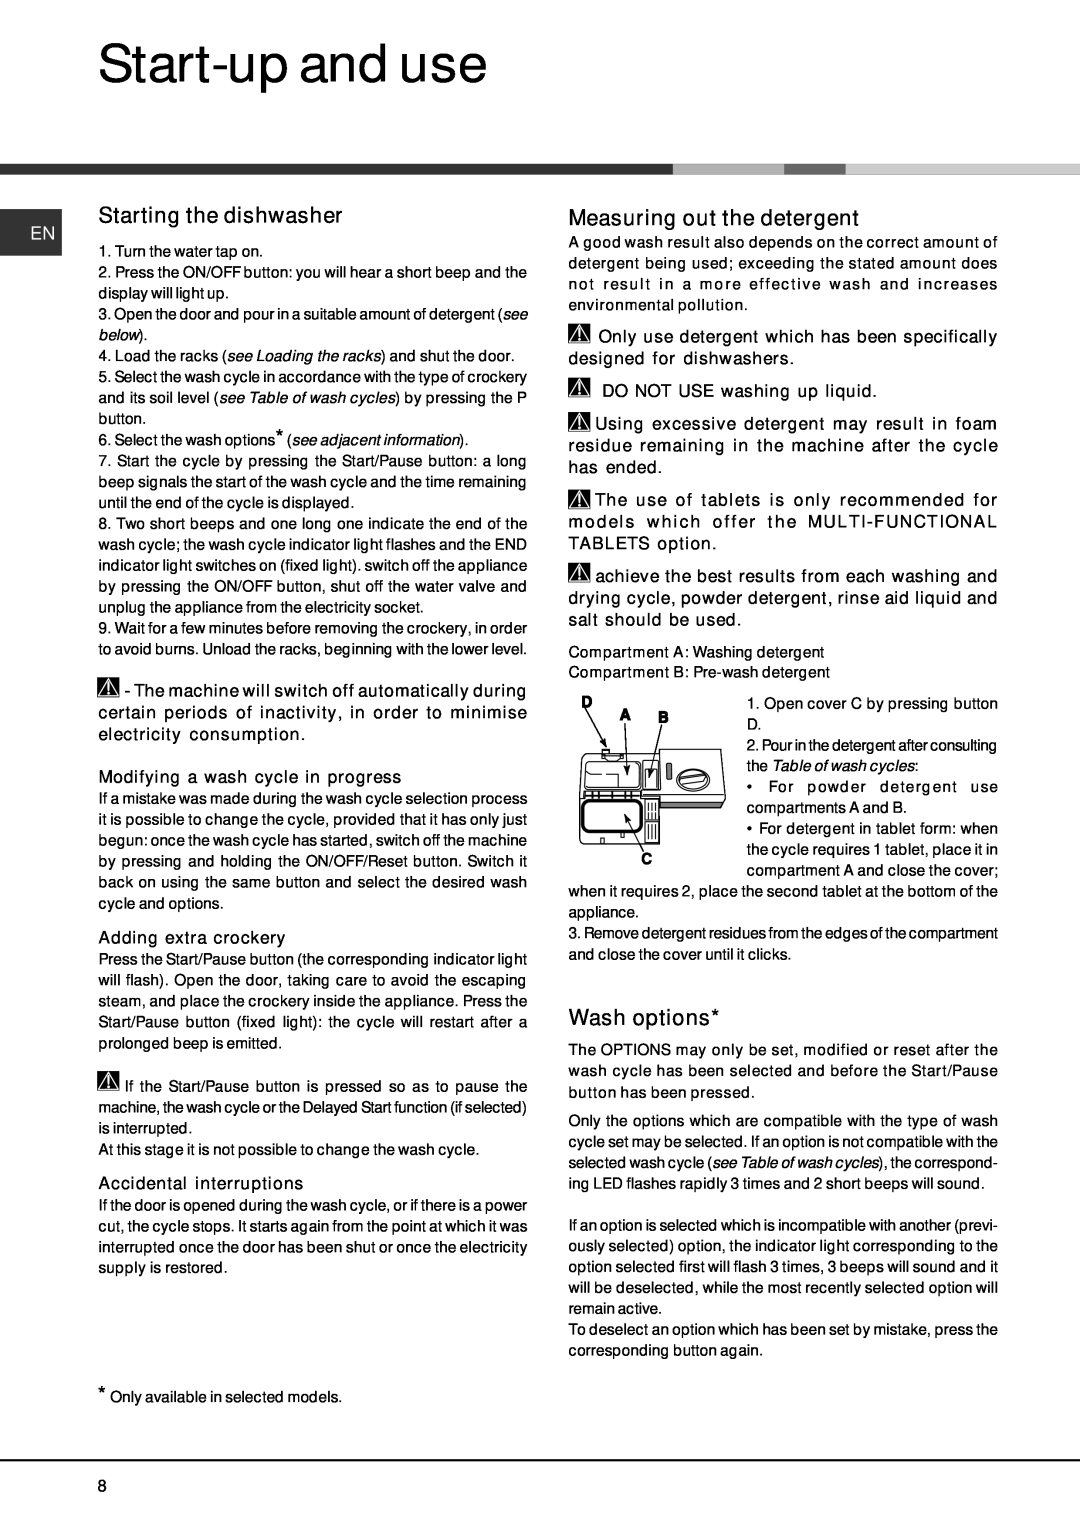 Hotpoint FDEF 4101 manual Start-upand use, Starting the dishwasher, Measuring out the detergent, Wash options 